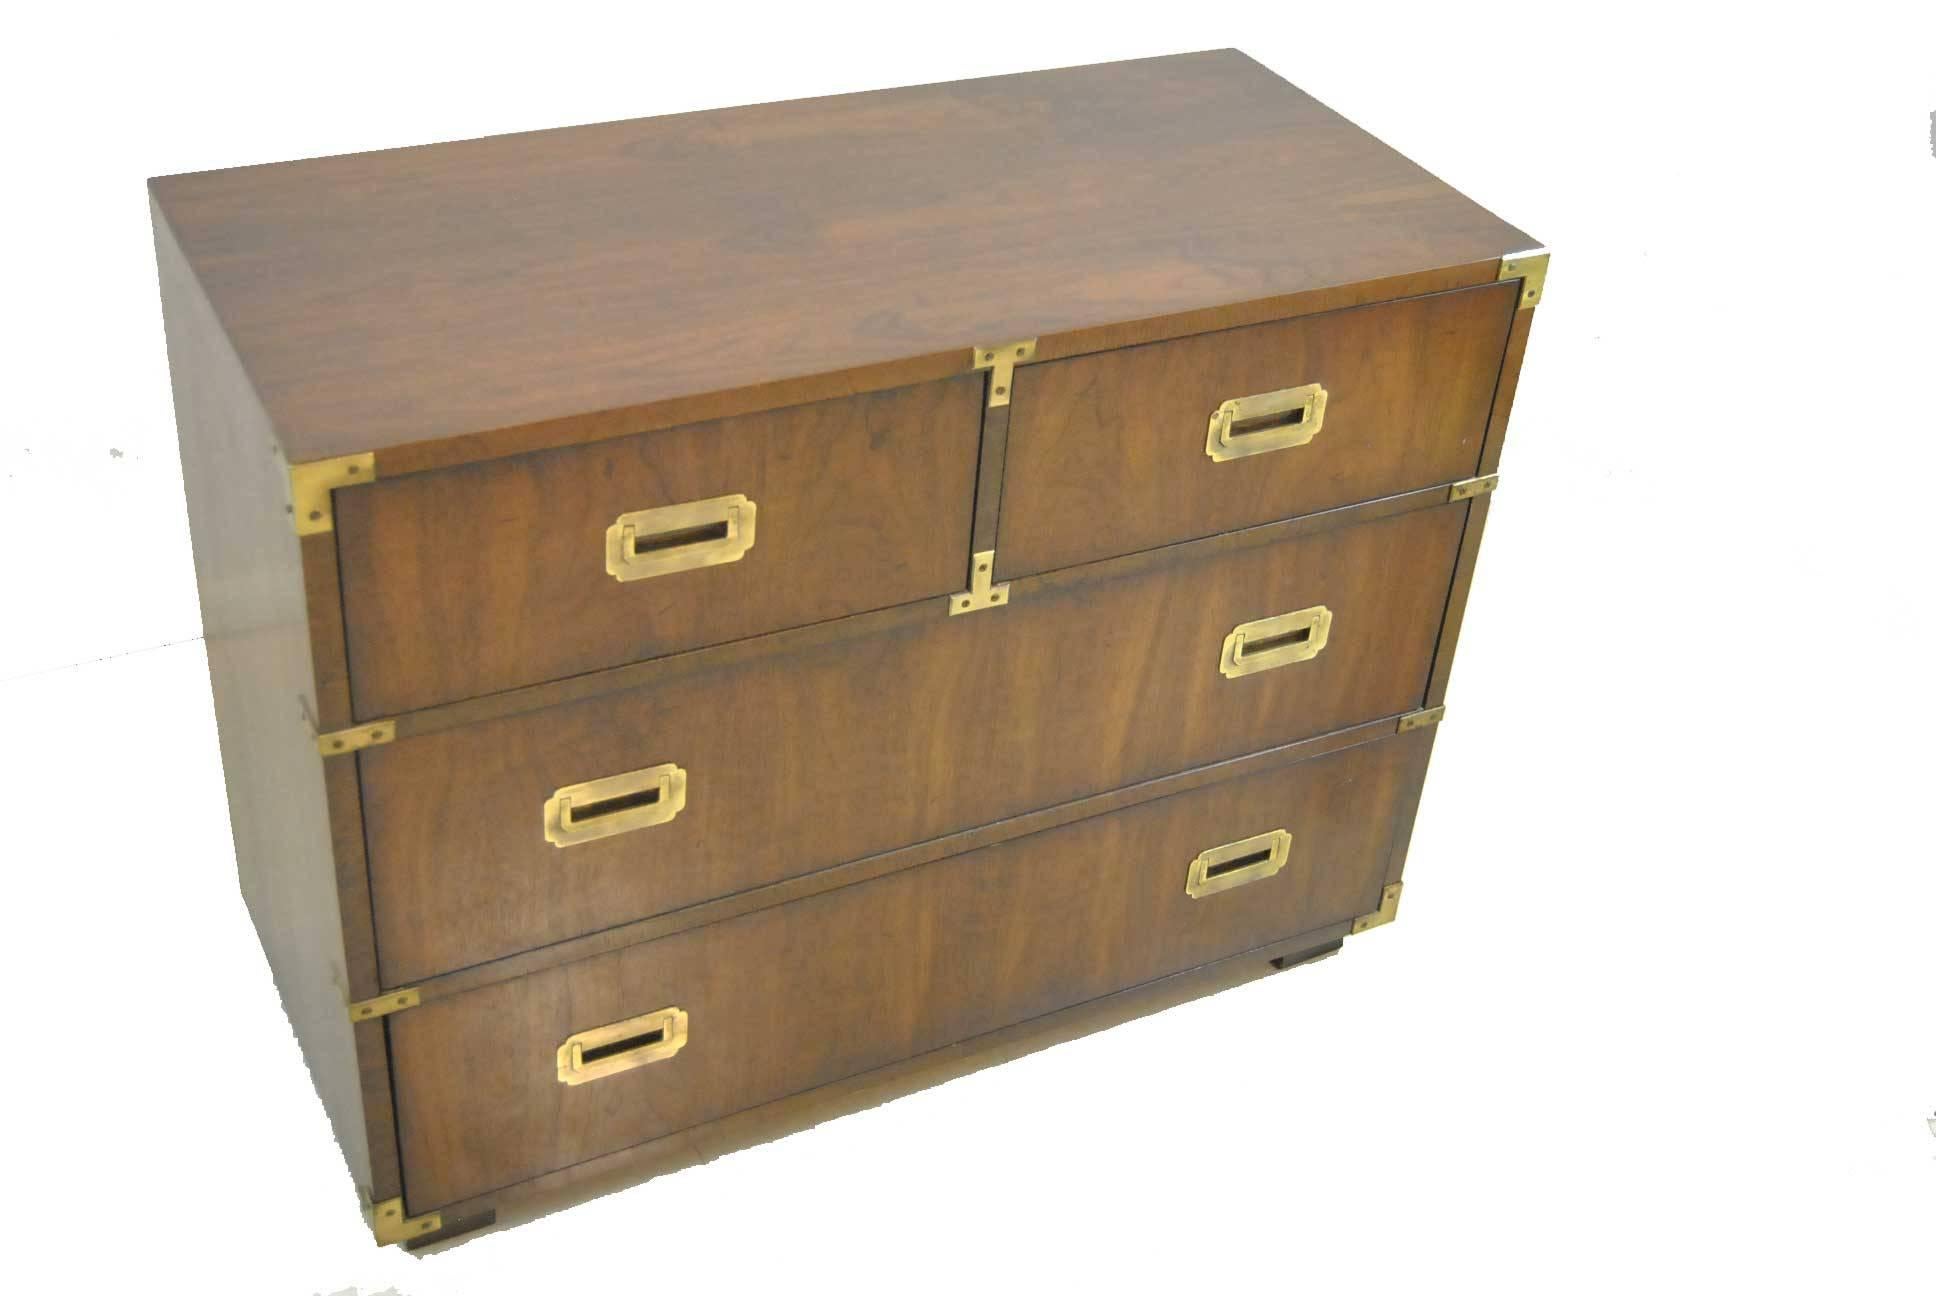 A stunning Campaign style chest by Lane Furniture. This beautiful chest features real brass trim, brass hardware and dovetailed drawers. Great condition with a refinished top. This piece offers a timeless design that mixes easily with both